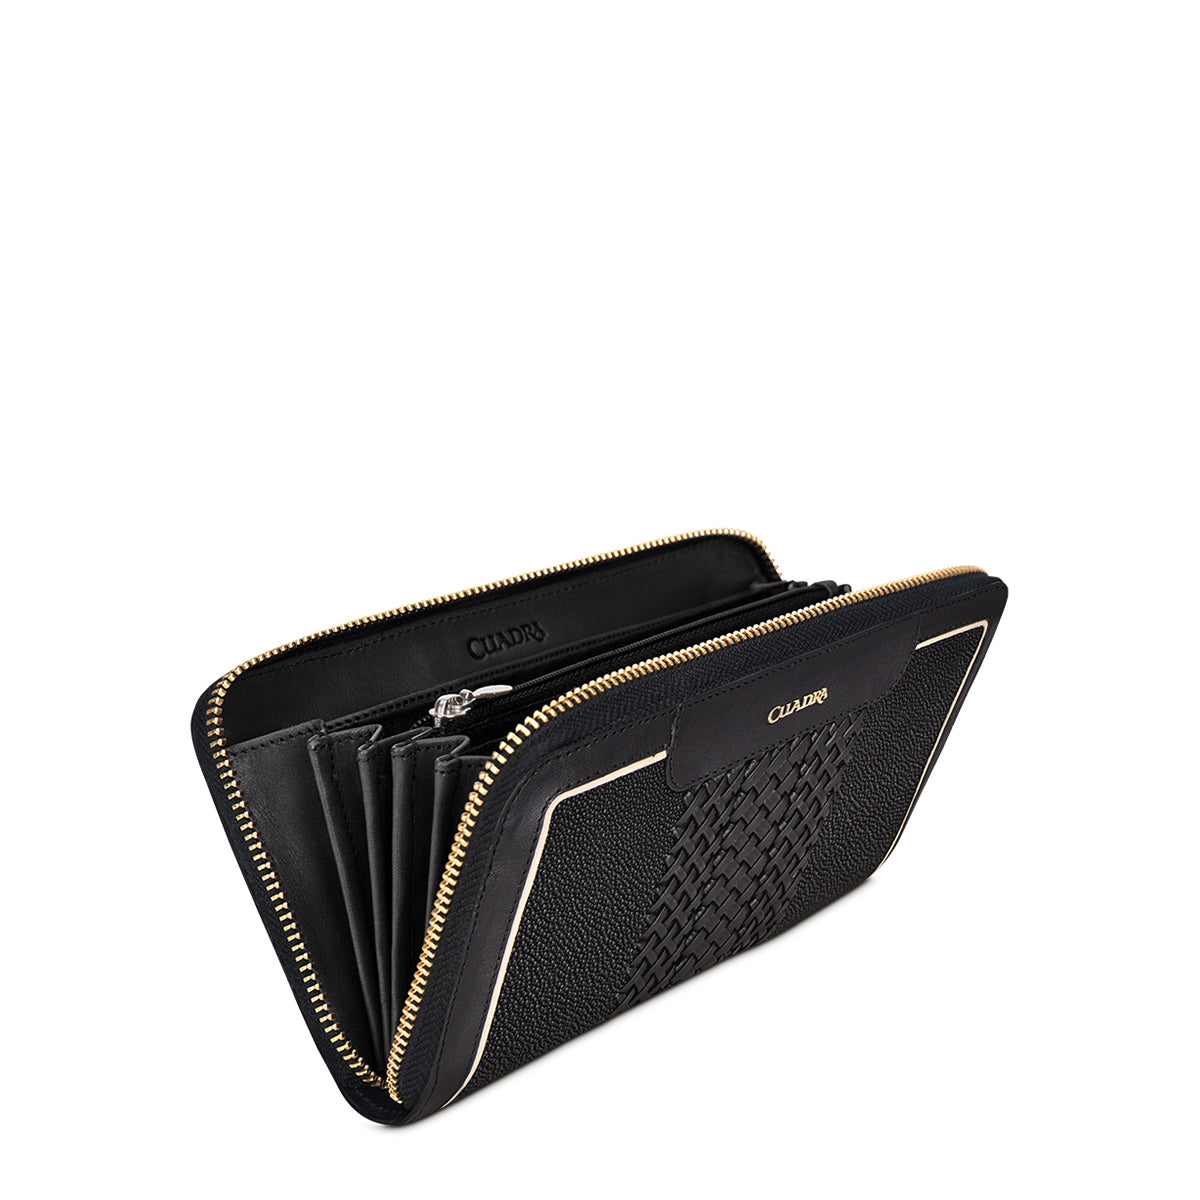 Black leather wallet with front intewoven detail